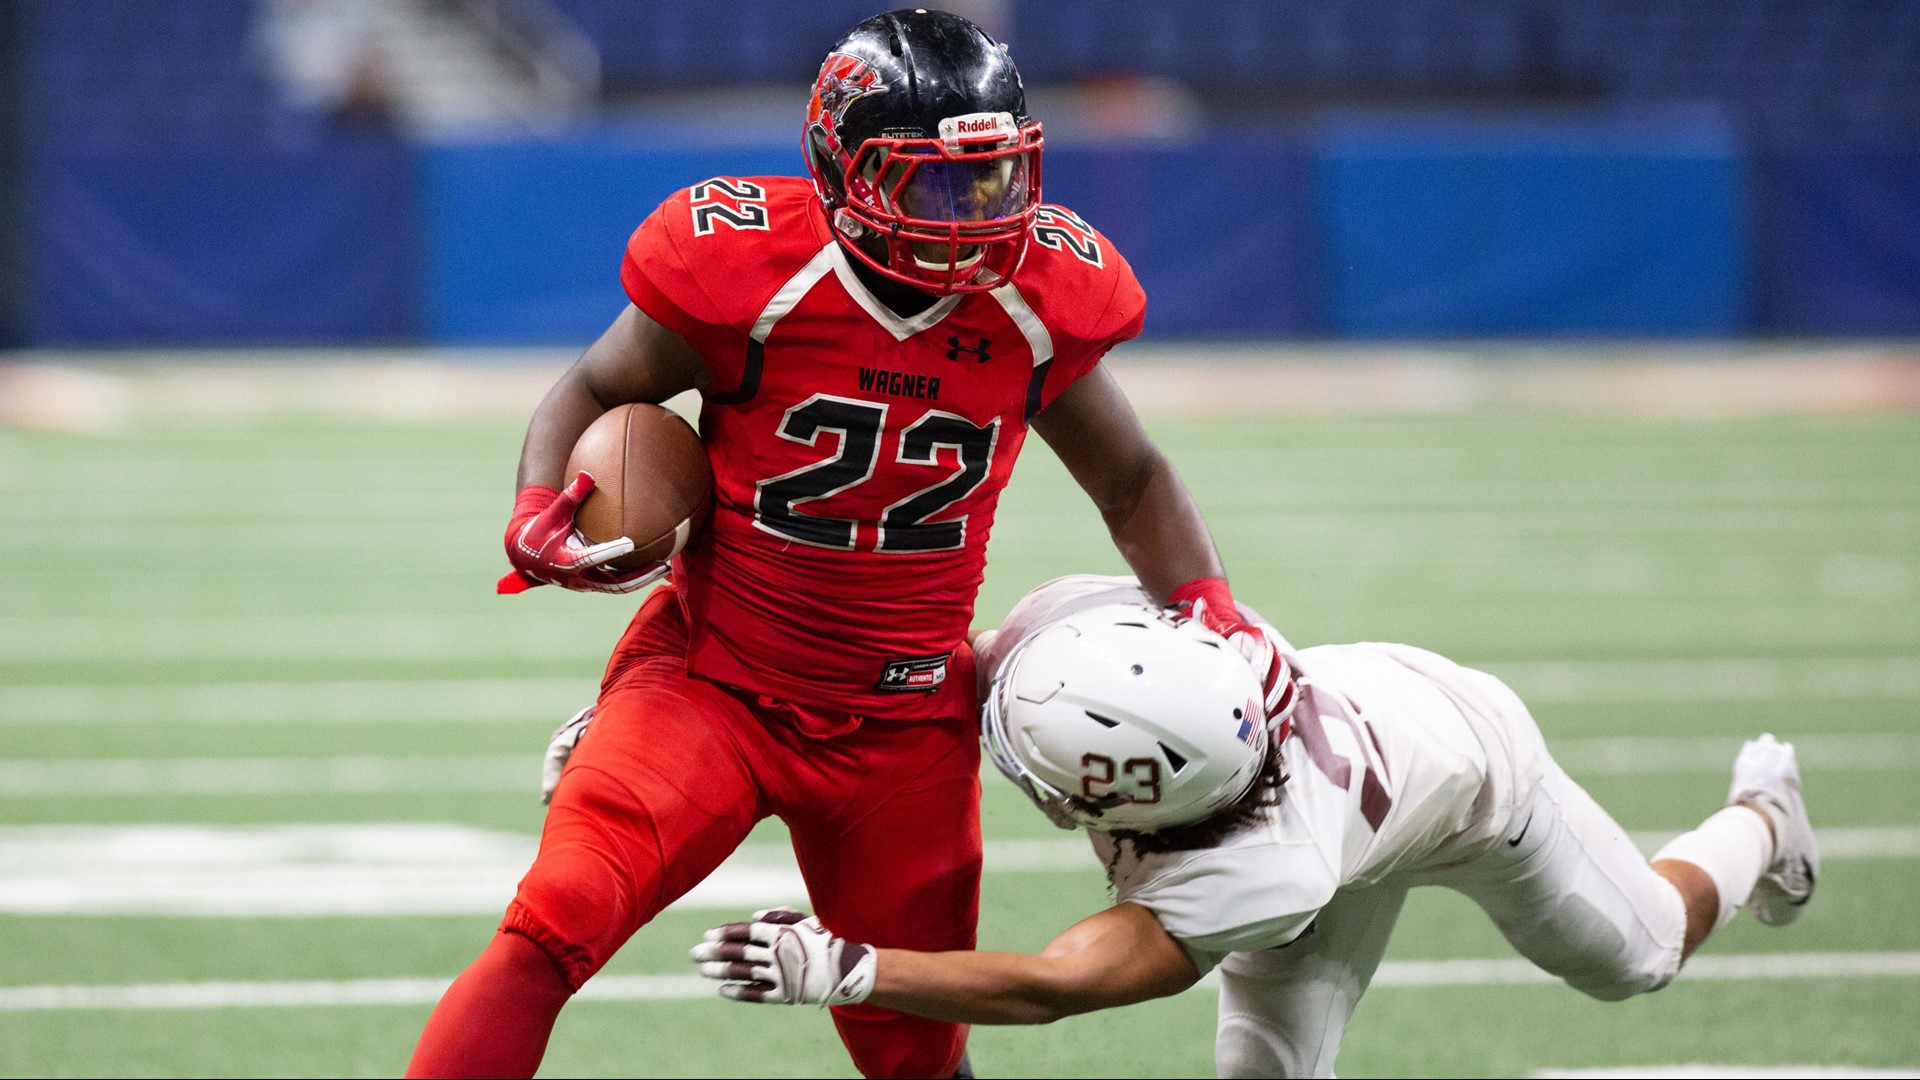 The Thunderbirds lost their quarterback from last year, but have plenty of returning talent, including fullback LJ Butler and DE DeMarcus Hendricks.